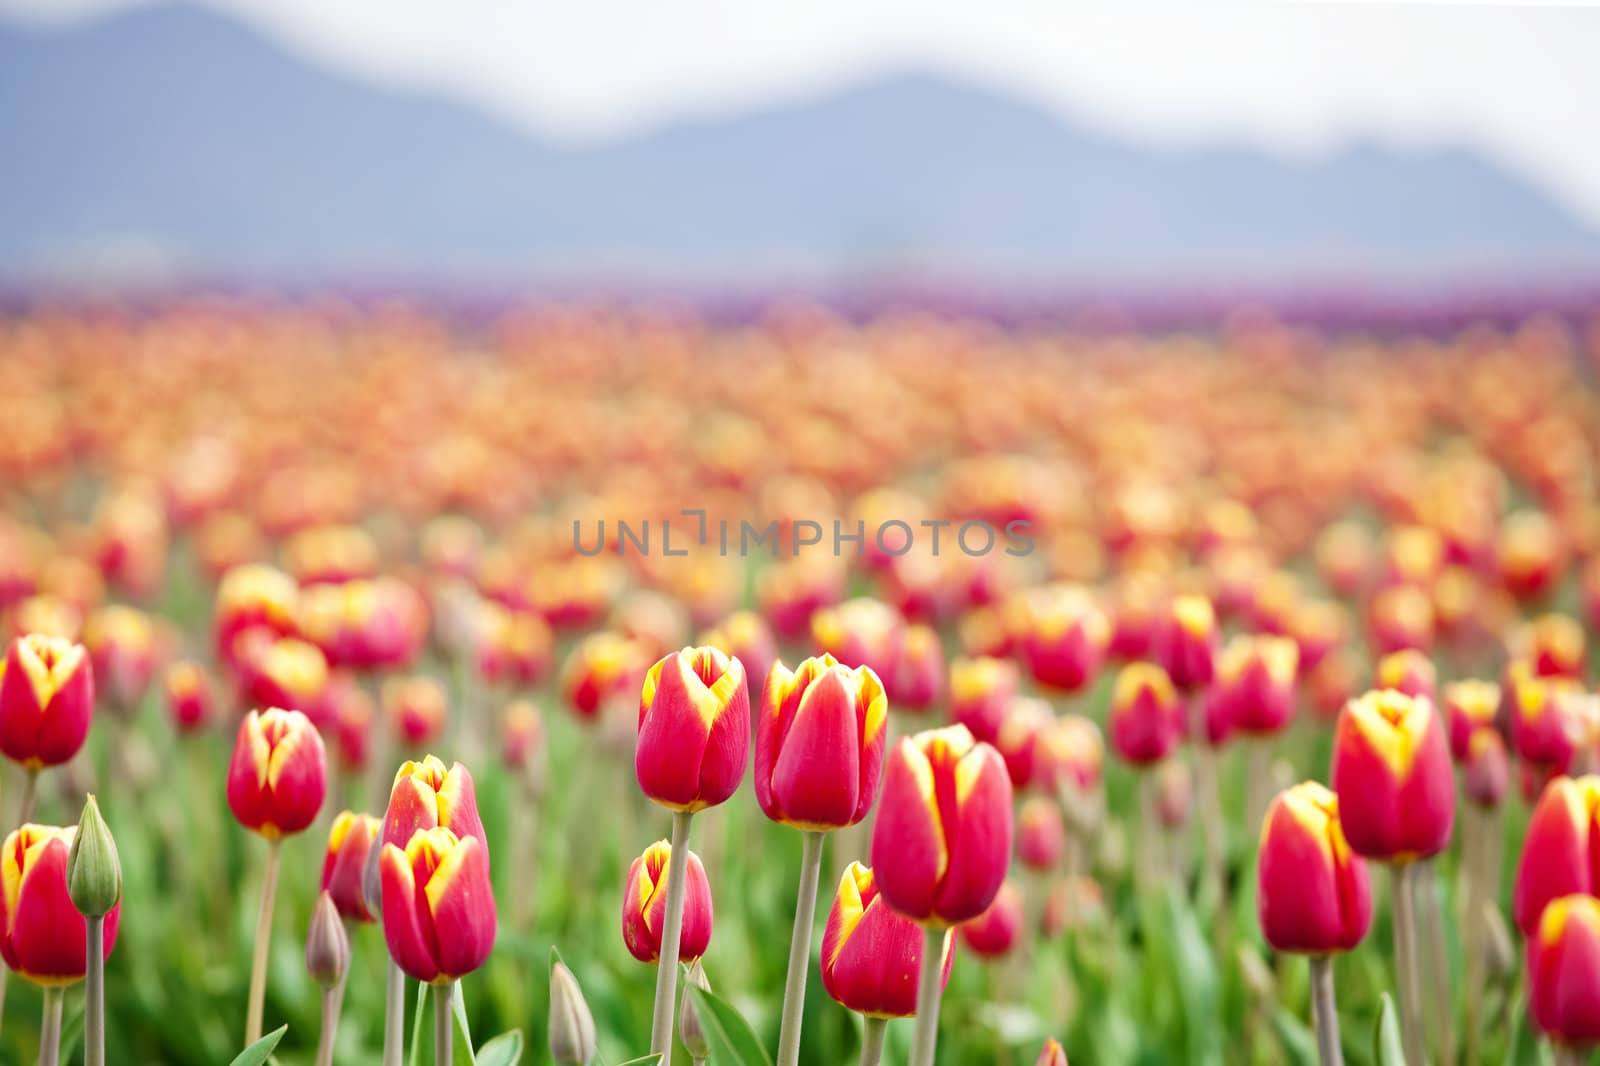 Beautiful colorful field of tulips. “Courtesy of RoozenGaarde (Tulips.com).”